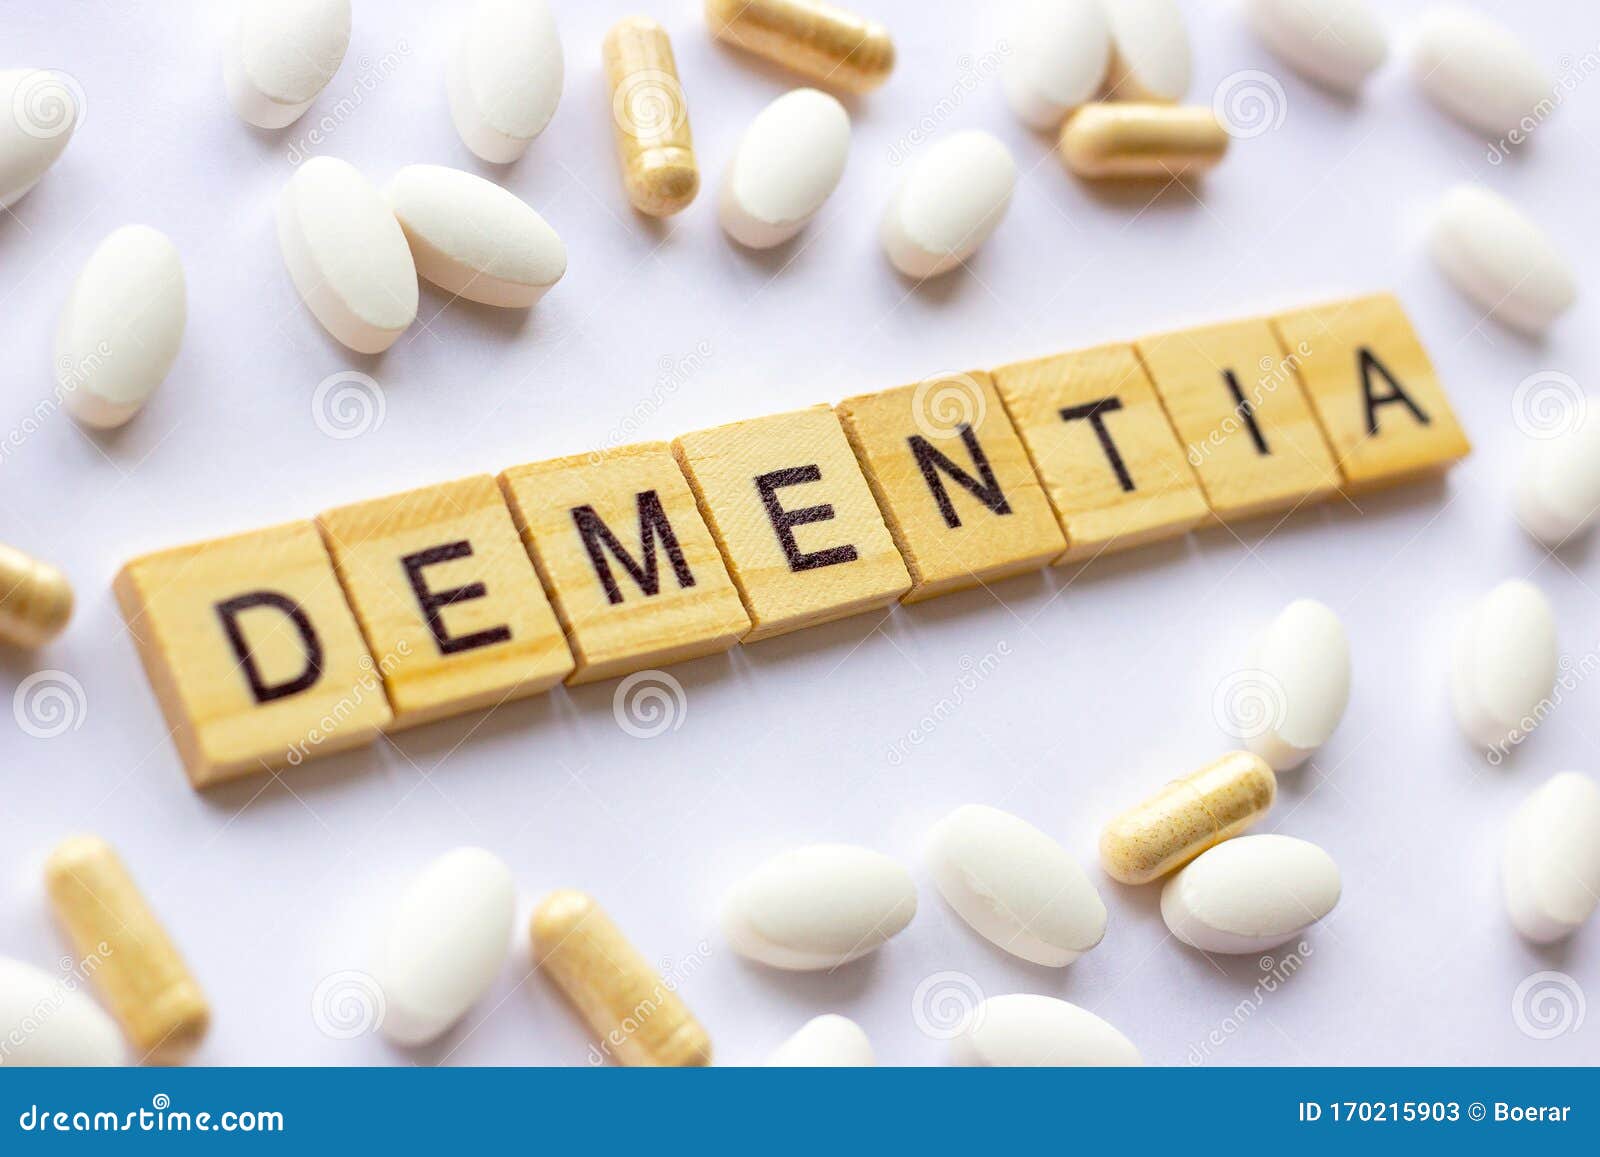 the medical phrase dementia on different pills and capsules background. pharmacy theme, health care